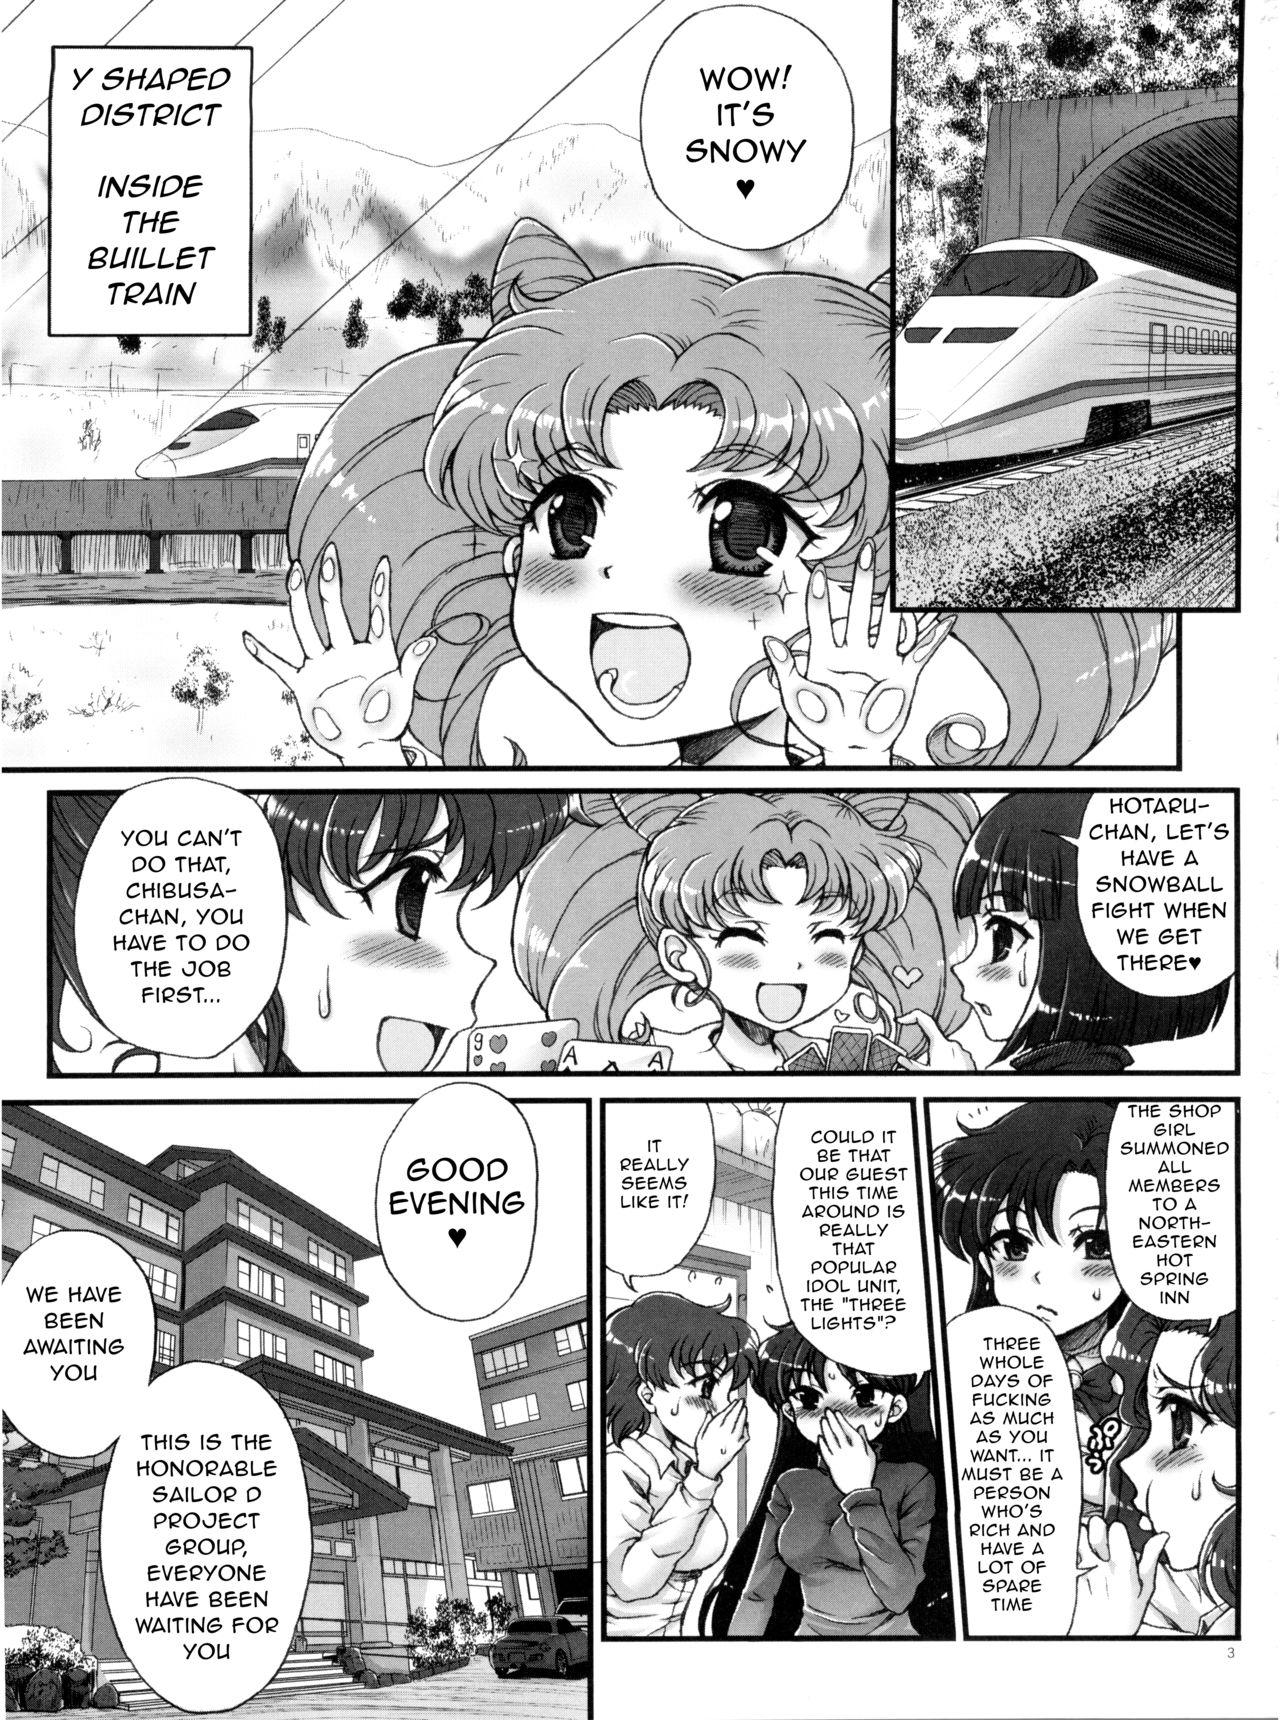 Rope Sailor Delivery Health All Stars - Sailor moon Boy Fuck Girl - Page 2